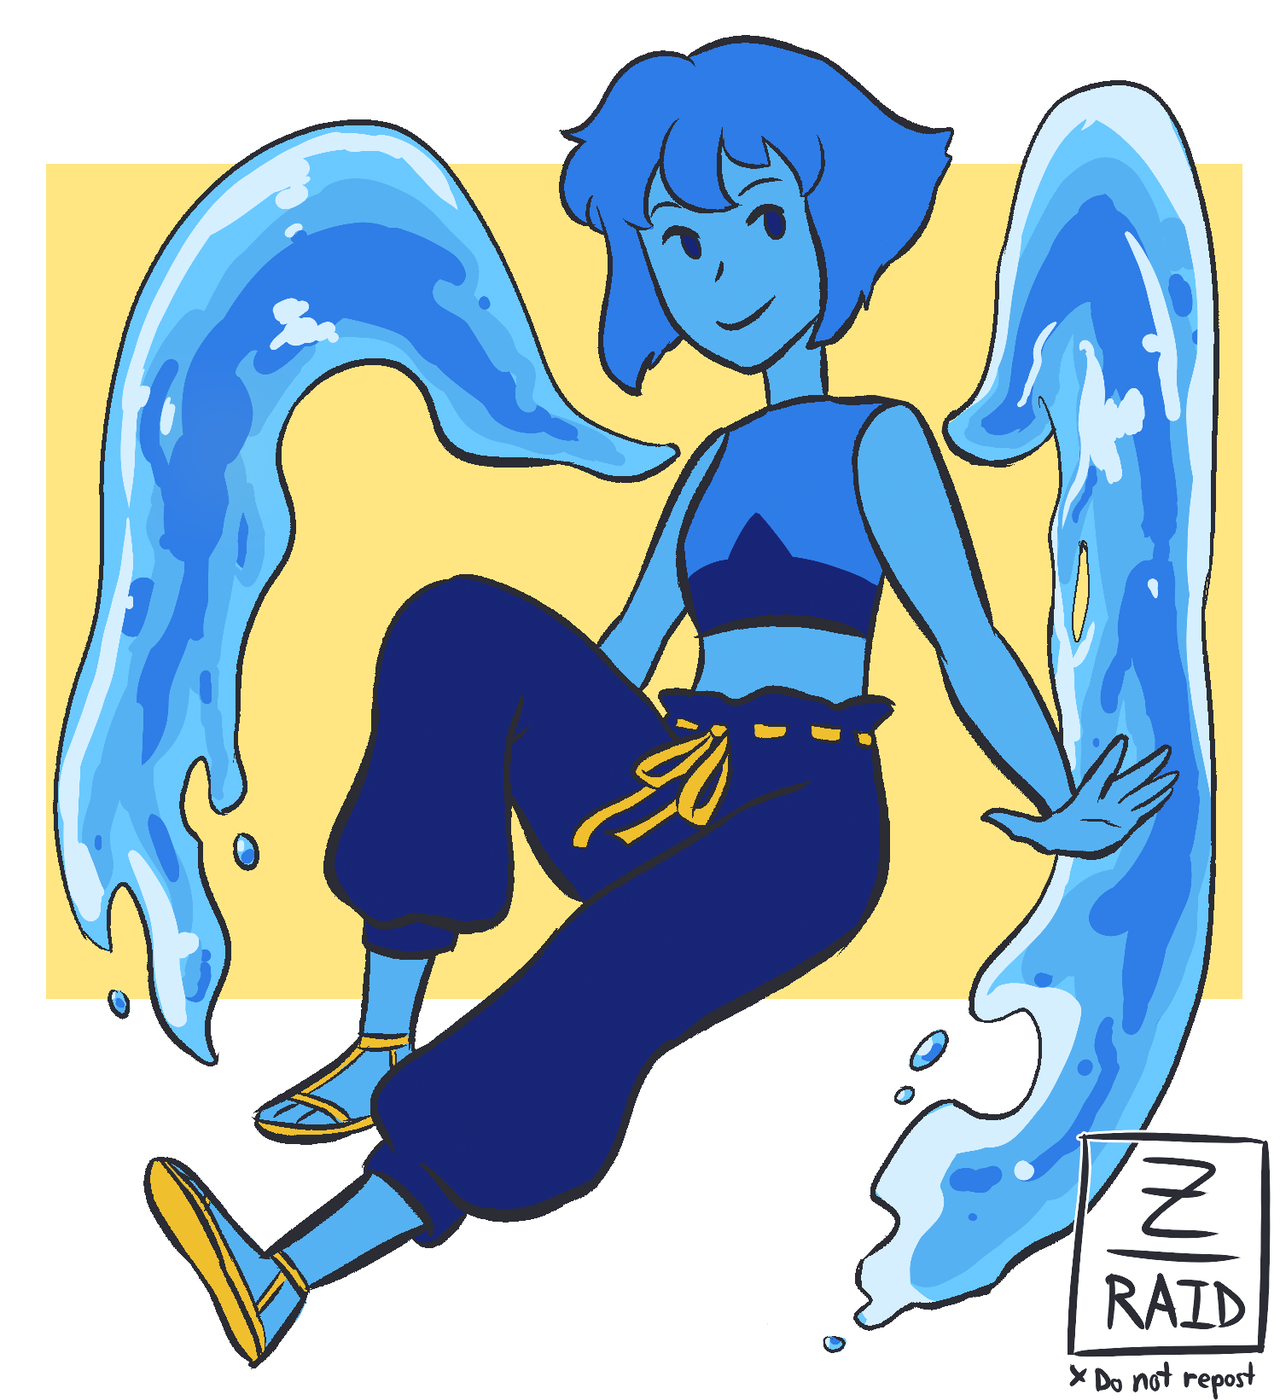 I like Lapis’s new outfit a lot. I’m glad she actually has some gold in her color palette now!